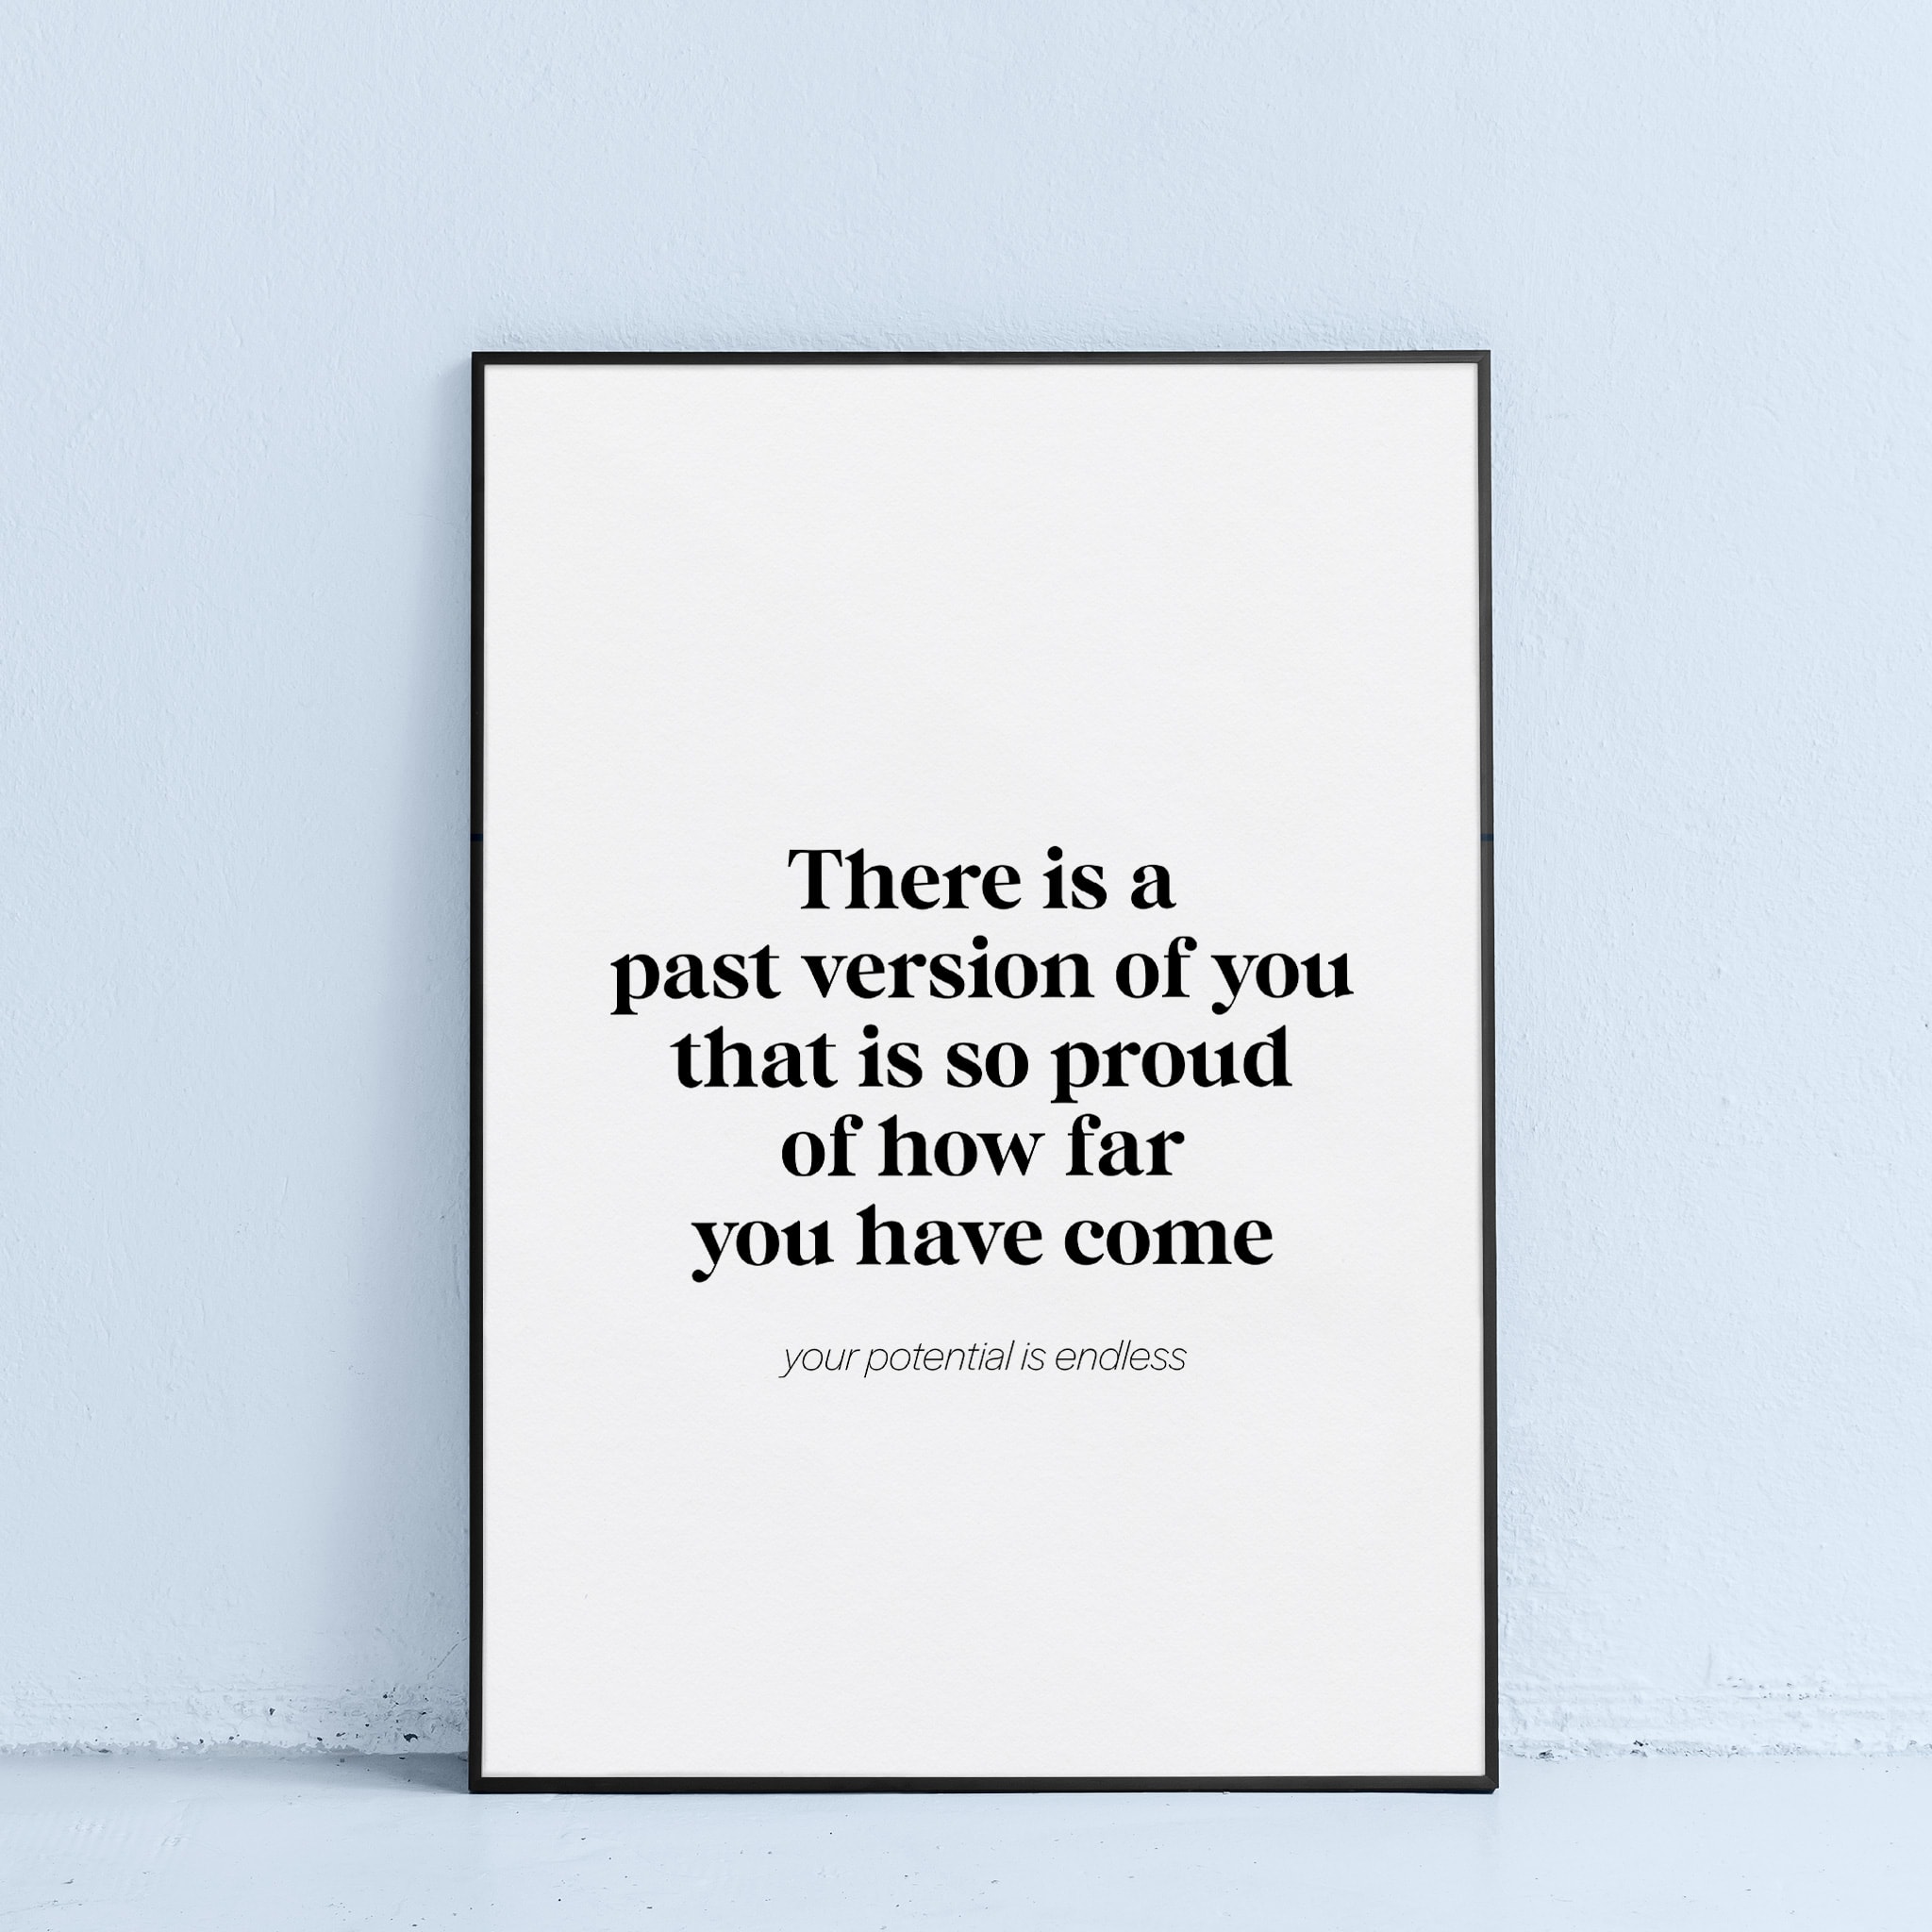 so proud of how far you have come printable wall art